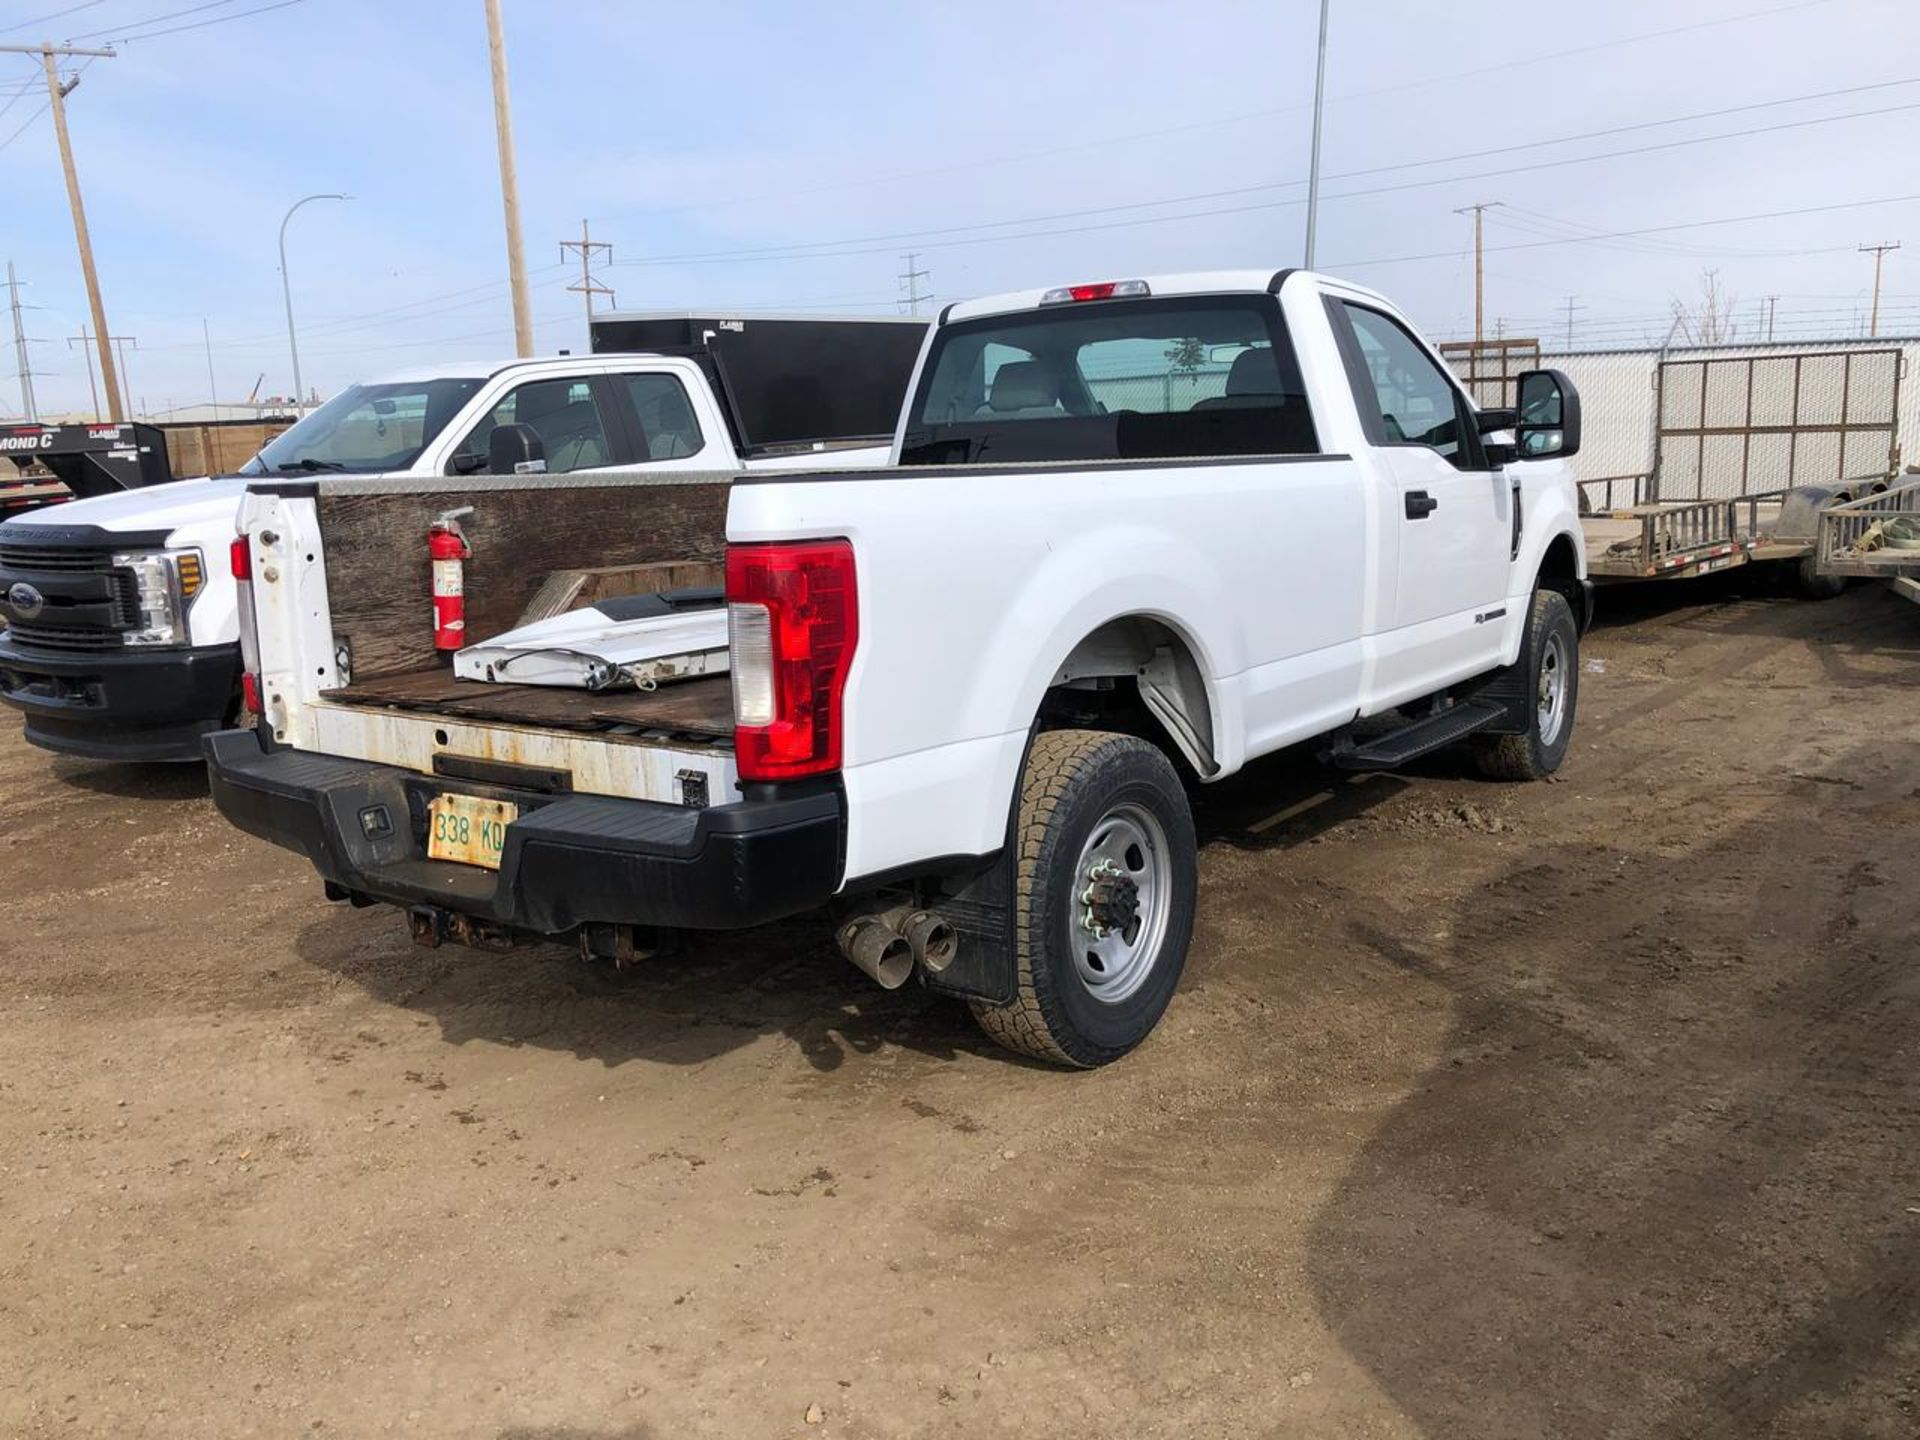 2017 Ford F350 SD Pick-up Truck - Image 5 of 9